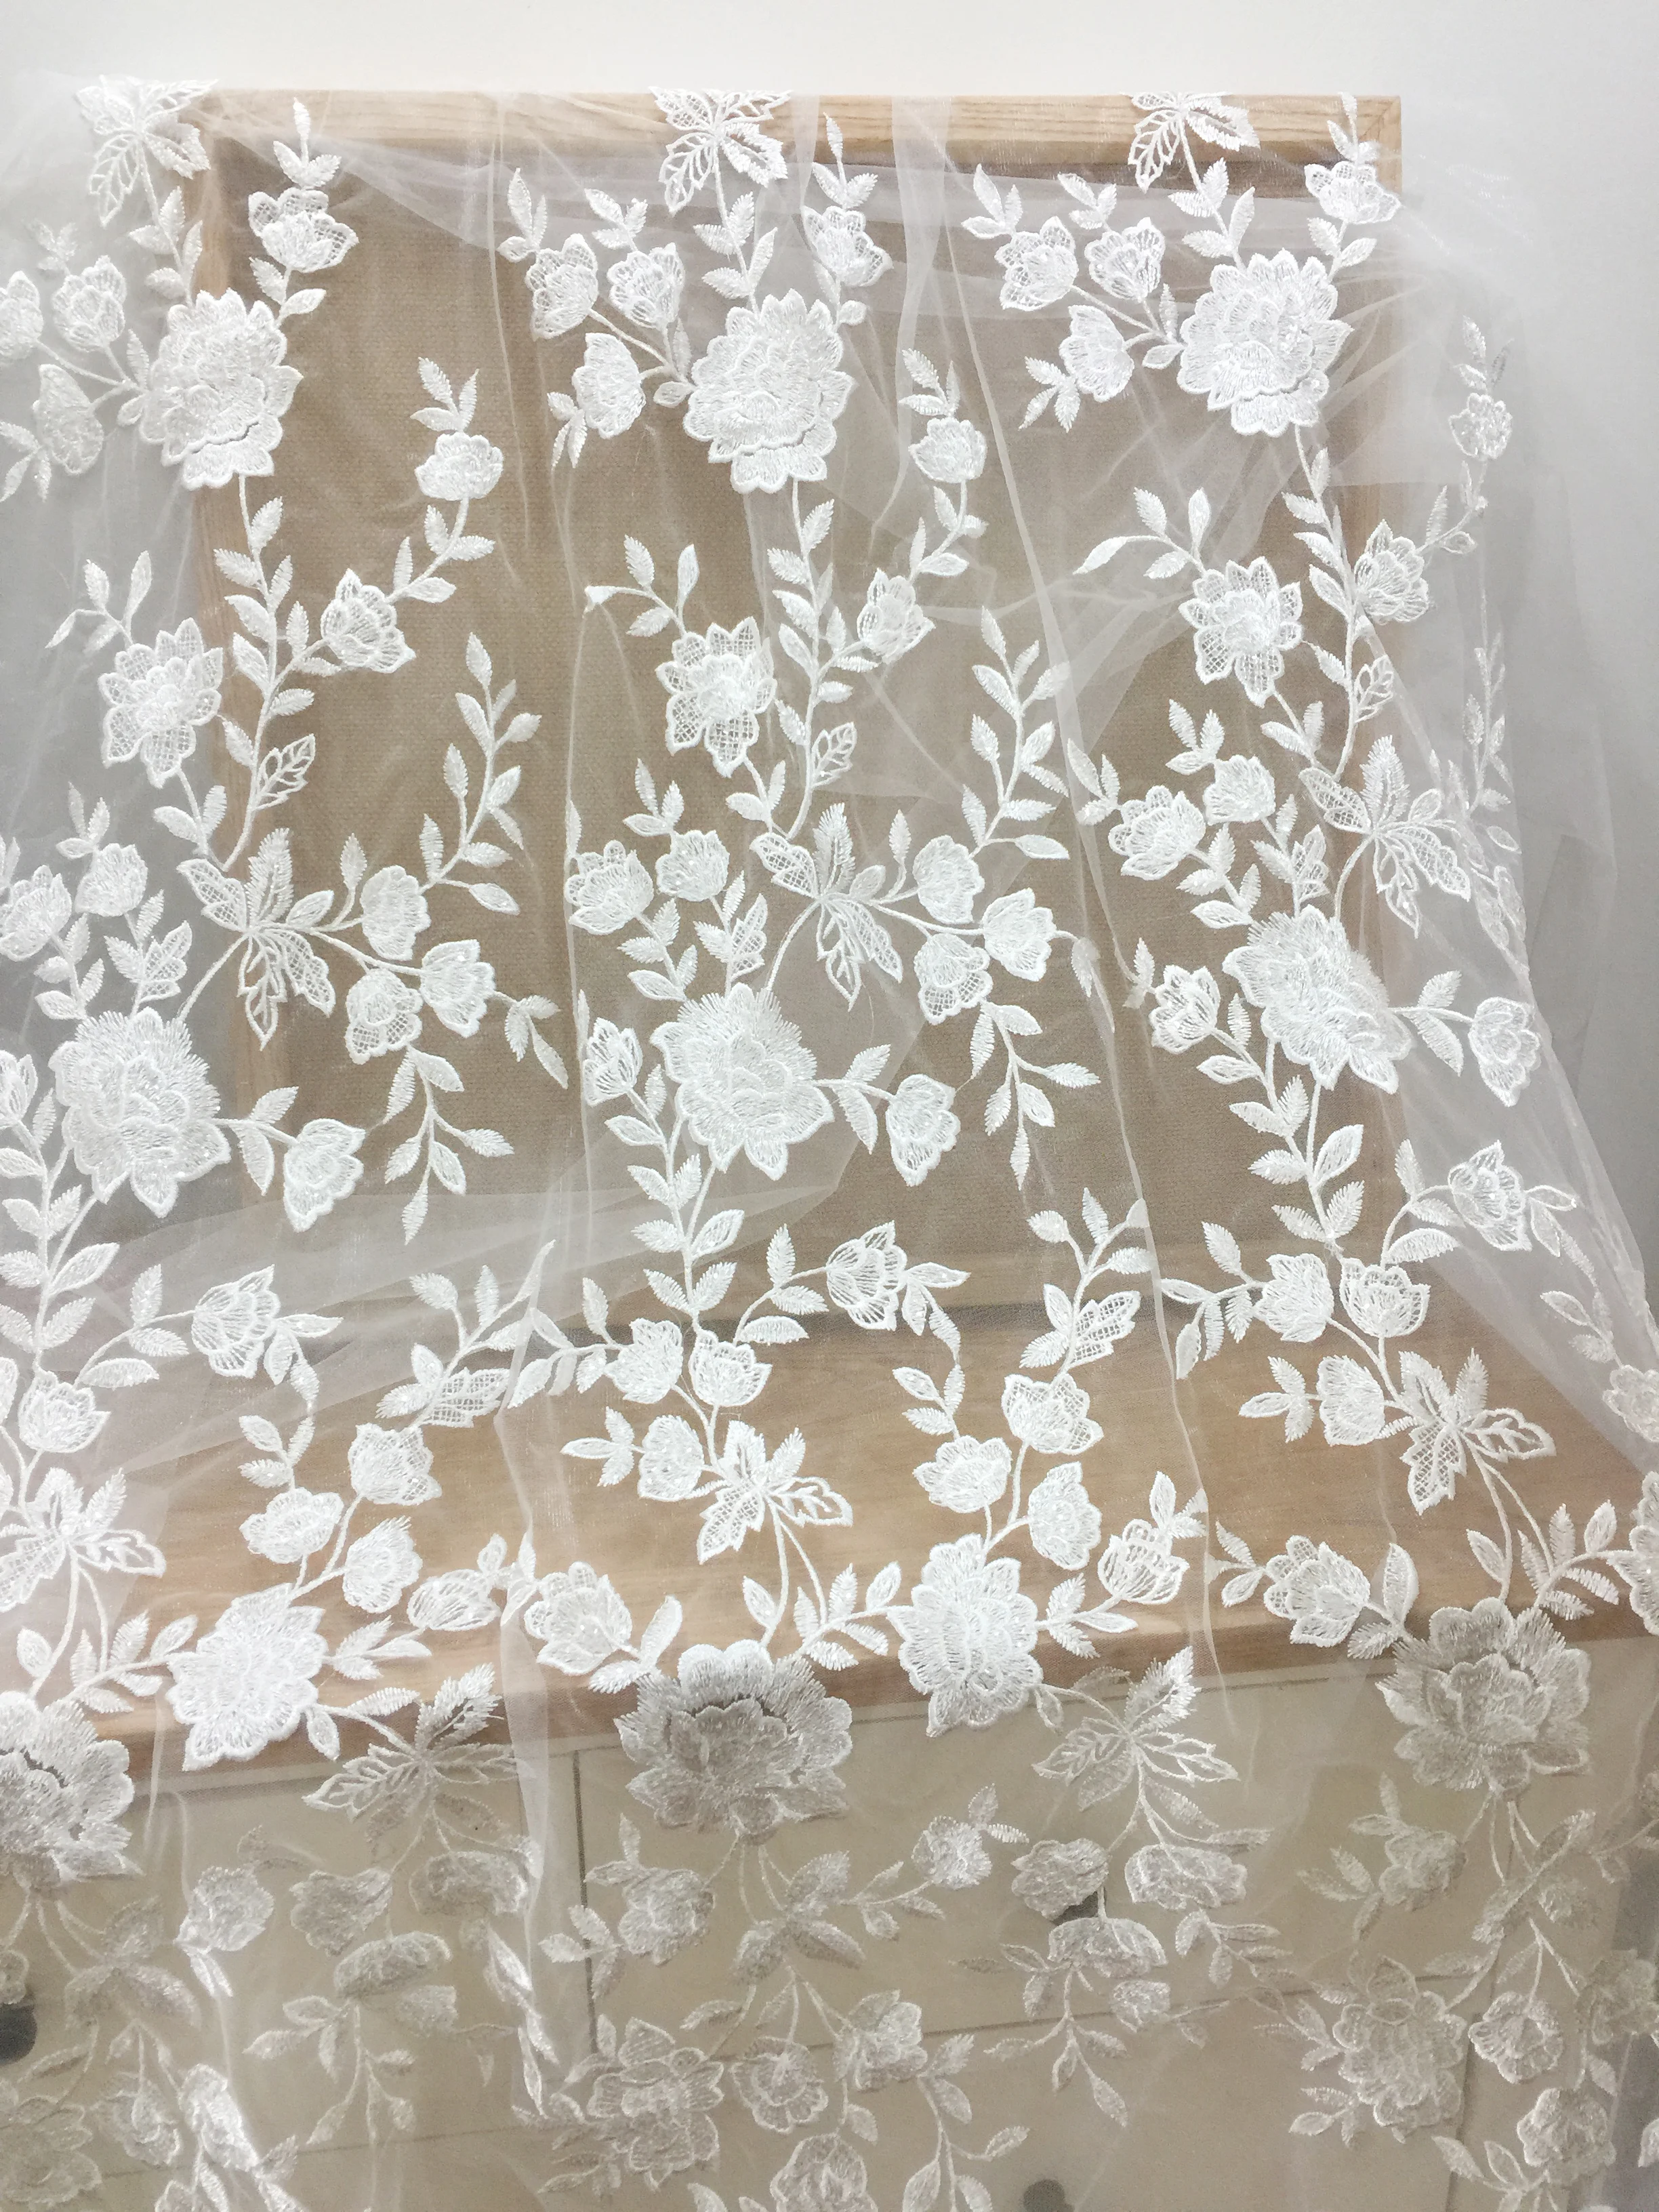 1 Yard Off white clear sequin floral tulle embroidery lace fabric by yard, bridal gown wedding dress couture lace images - 6